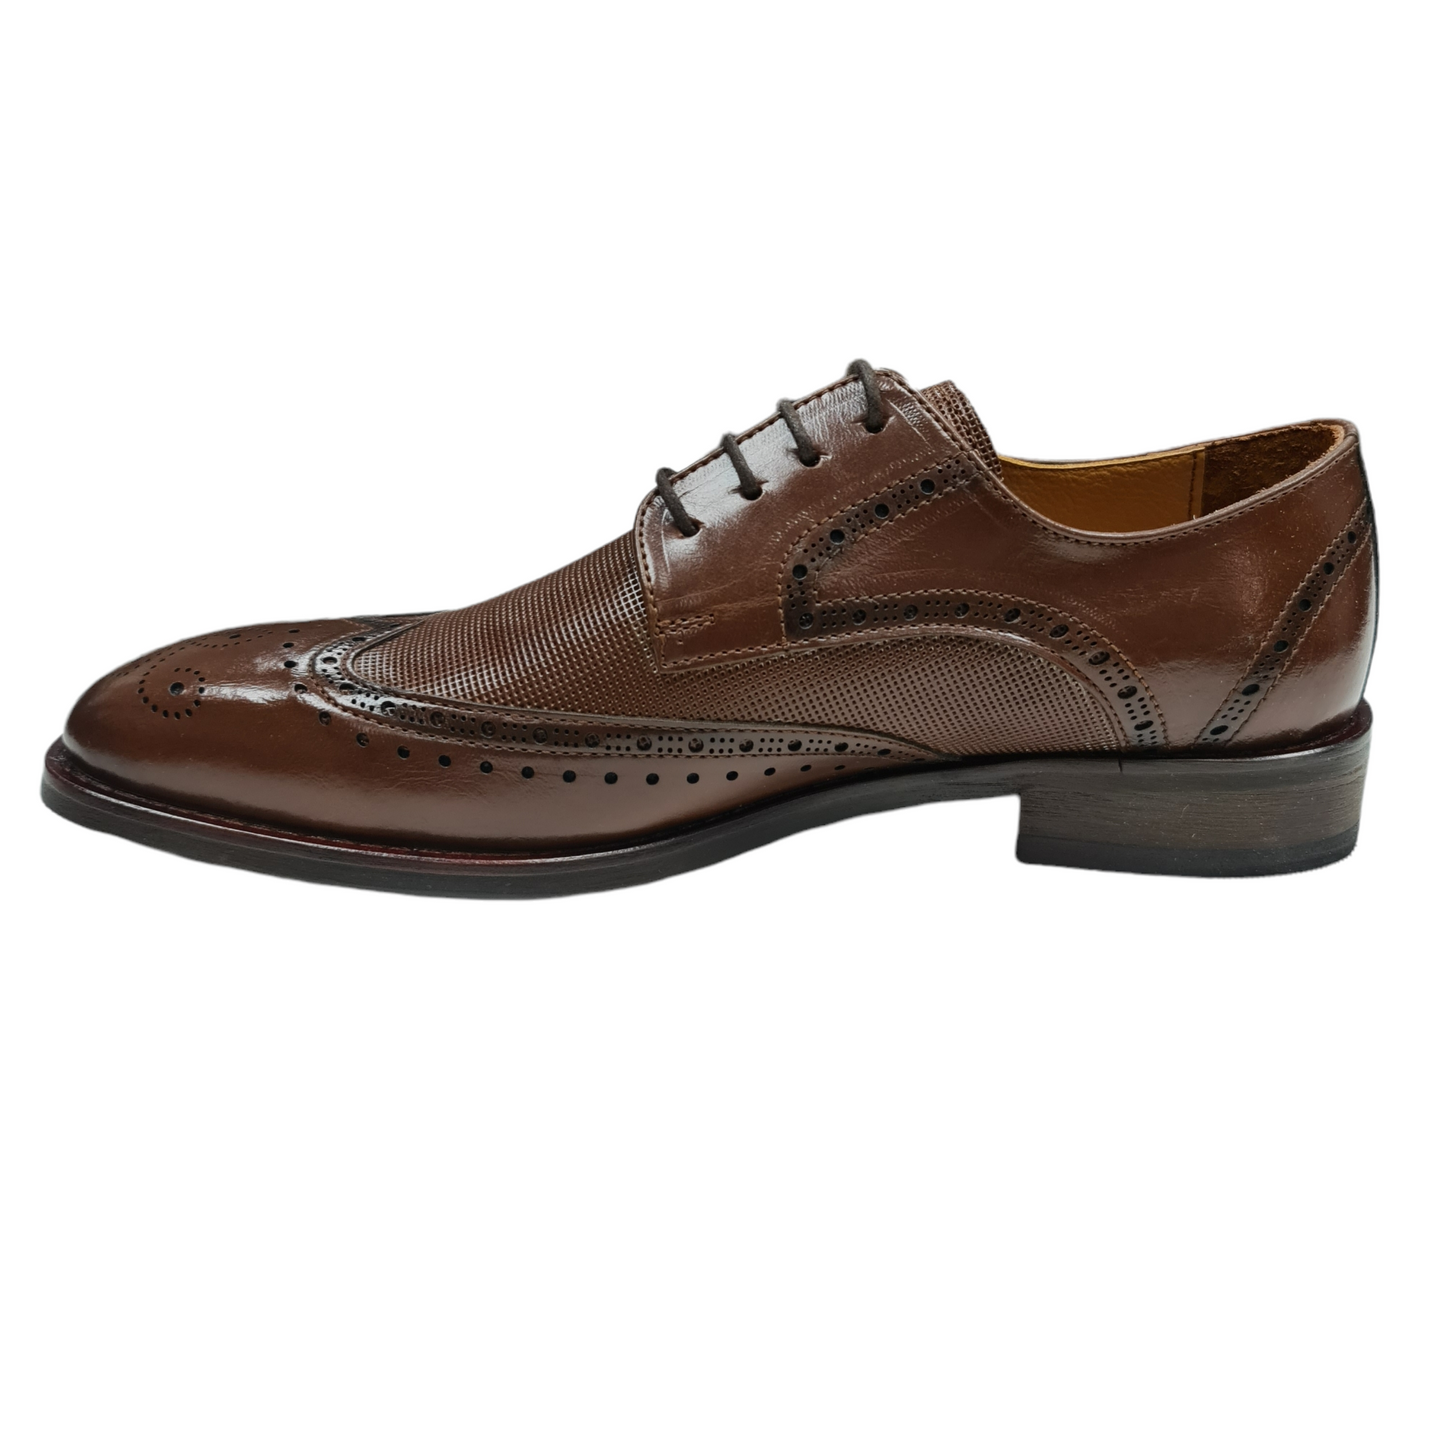 Benetti George Chestnut Shoes